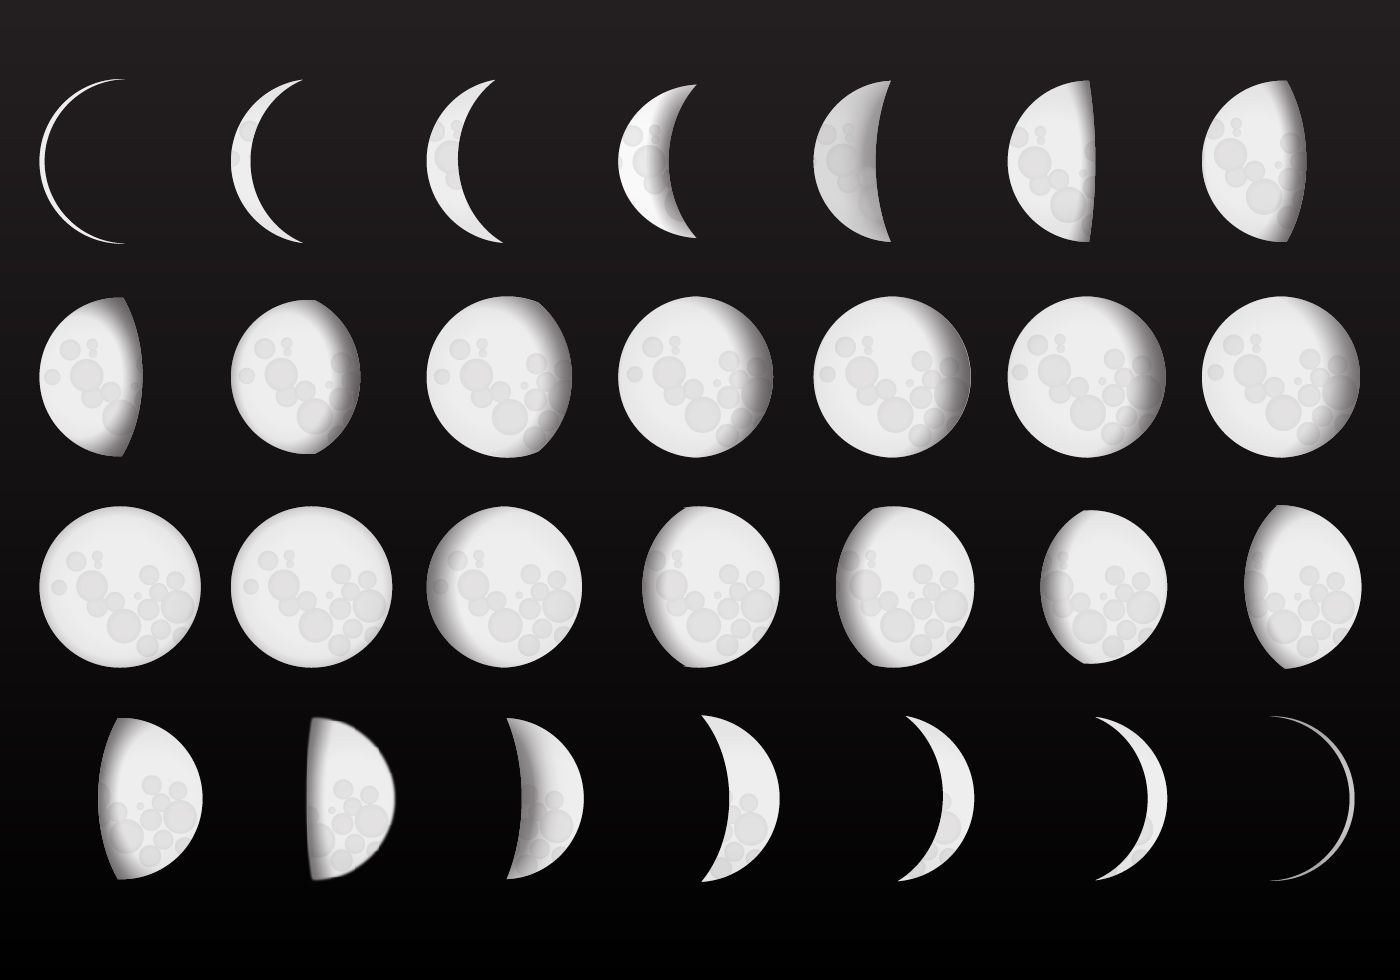 A series of 29 moon phases from new moon to full moon - Moon phases